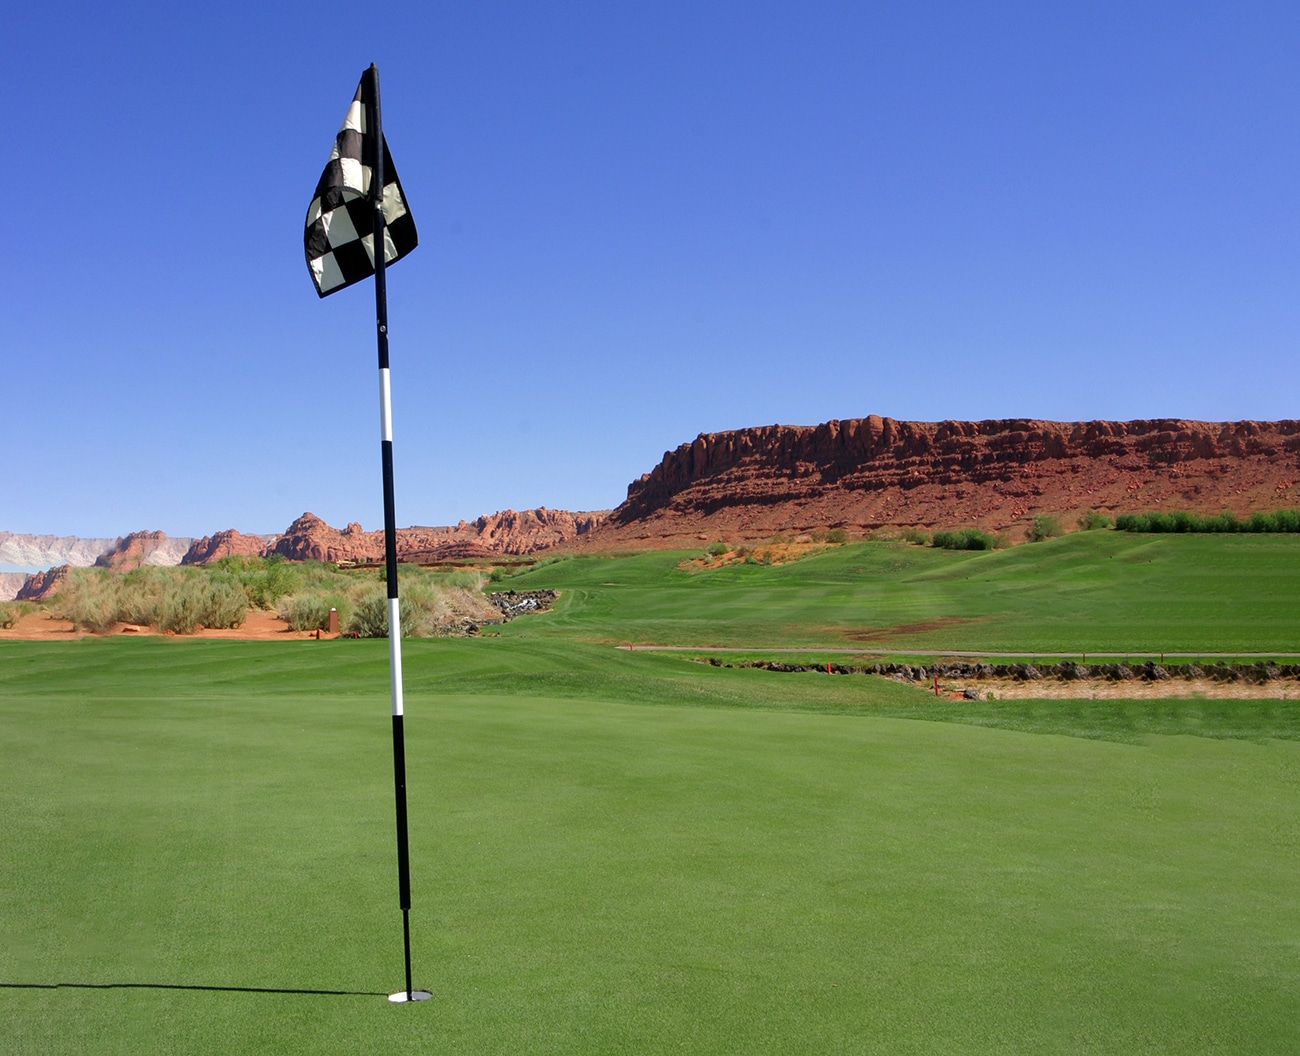 A golf course with red rock bluff in the background.